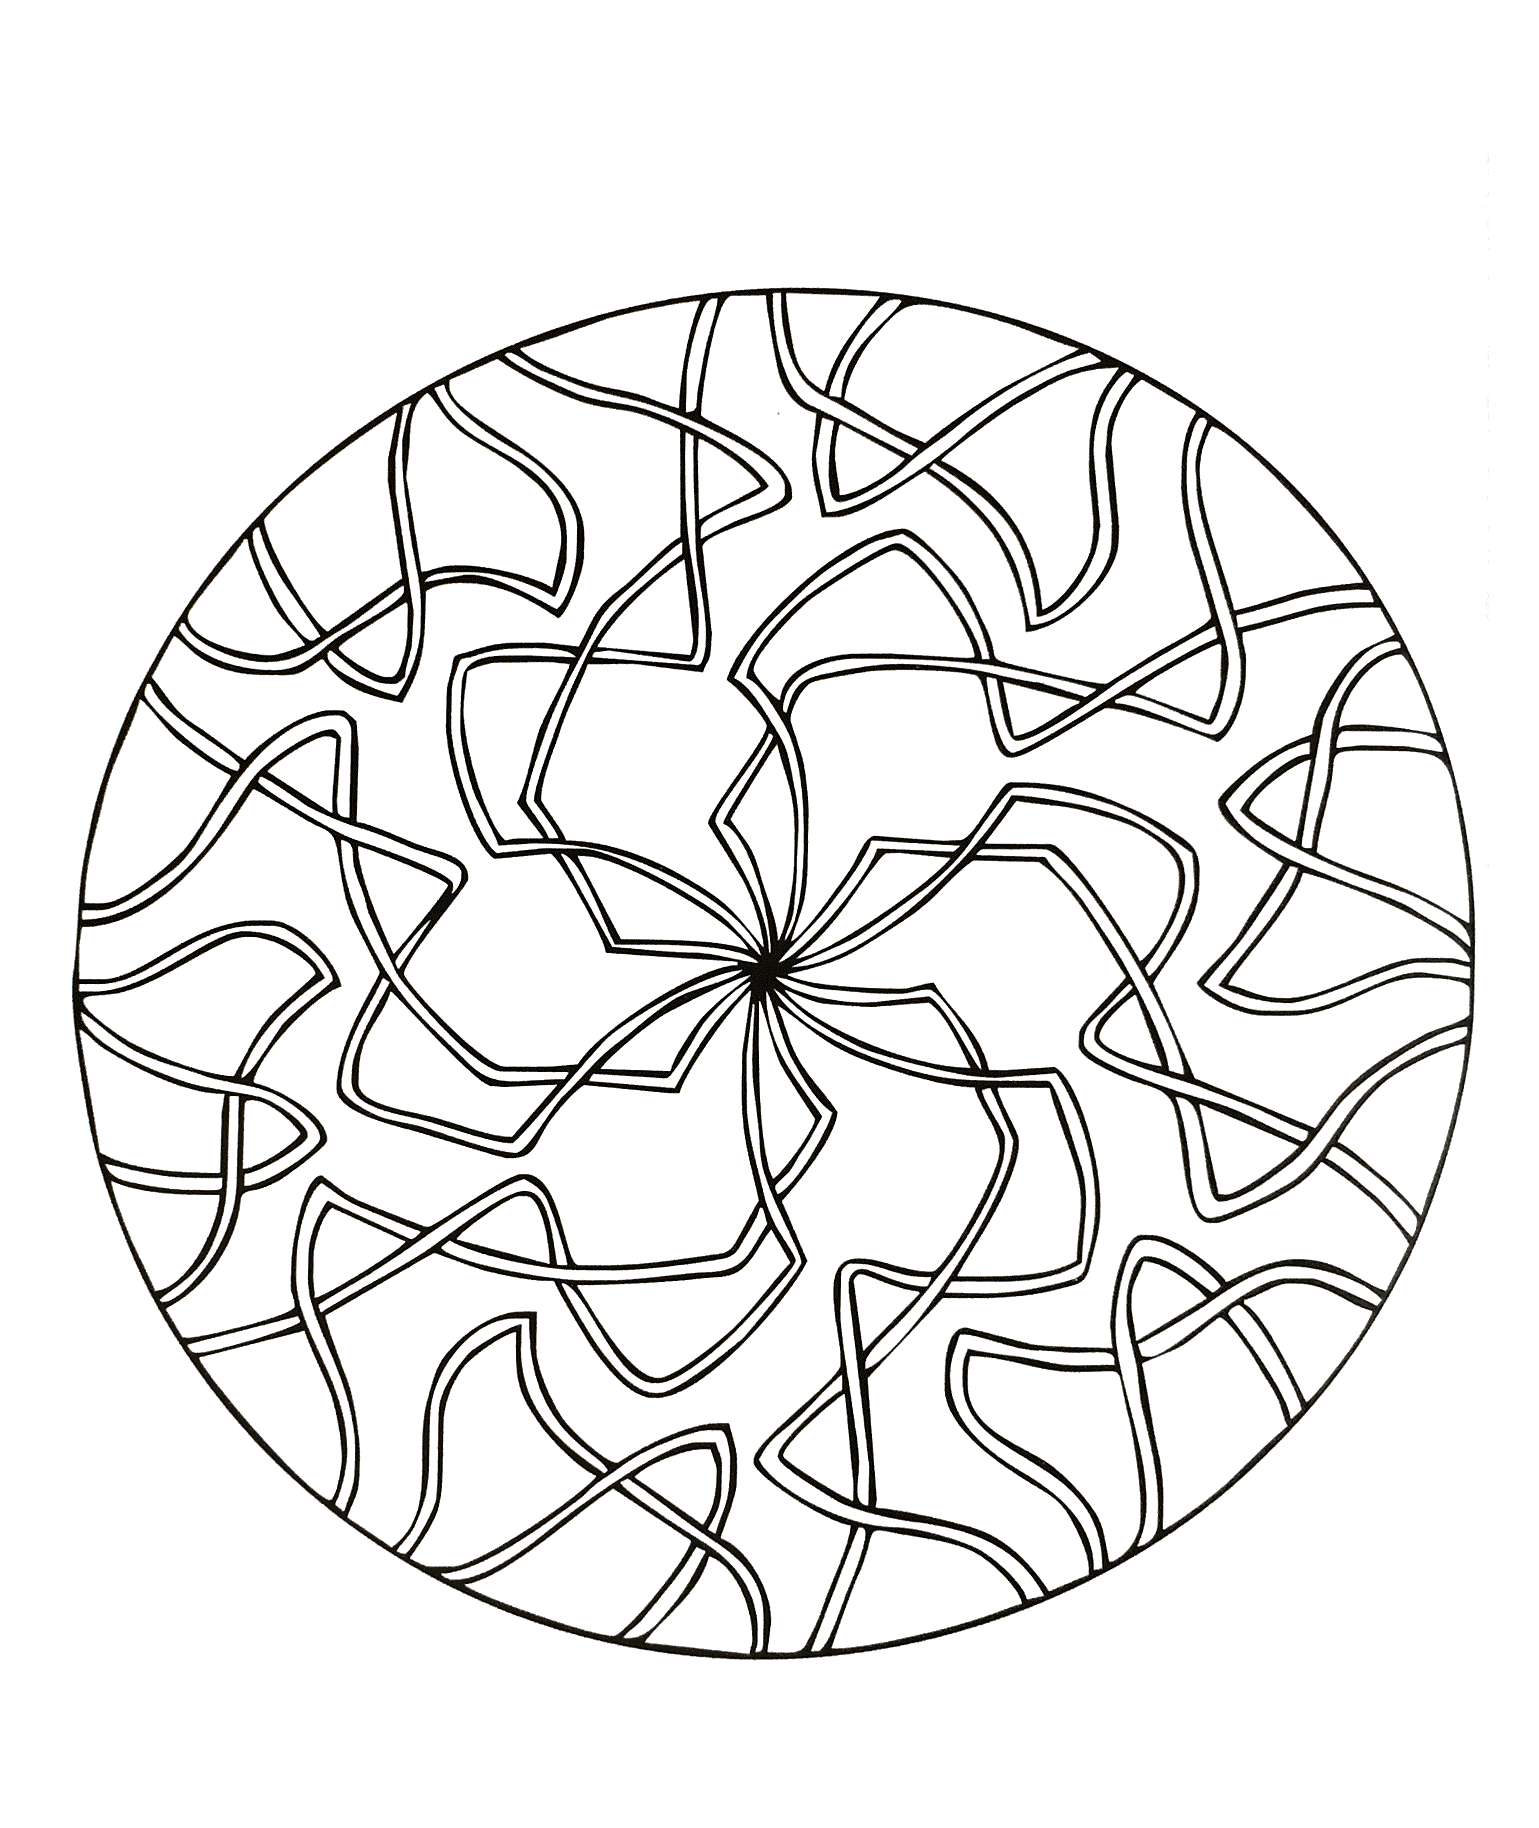 Elegant and harmonious Mandala ... When coloring can really relax you ... This is the case with this Mandala coloring page of high quality.